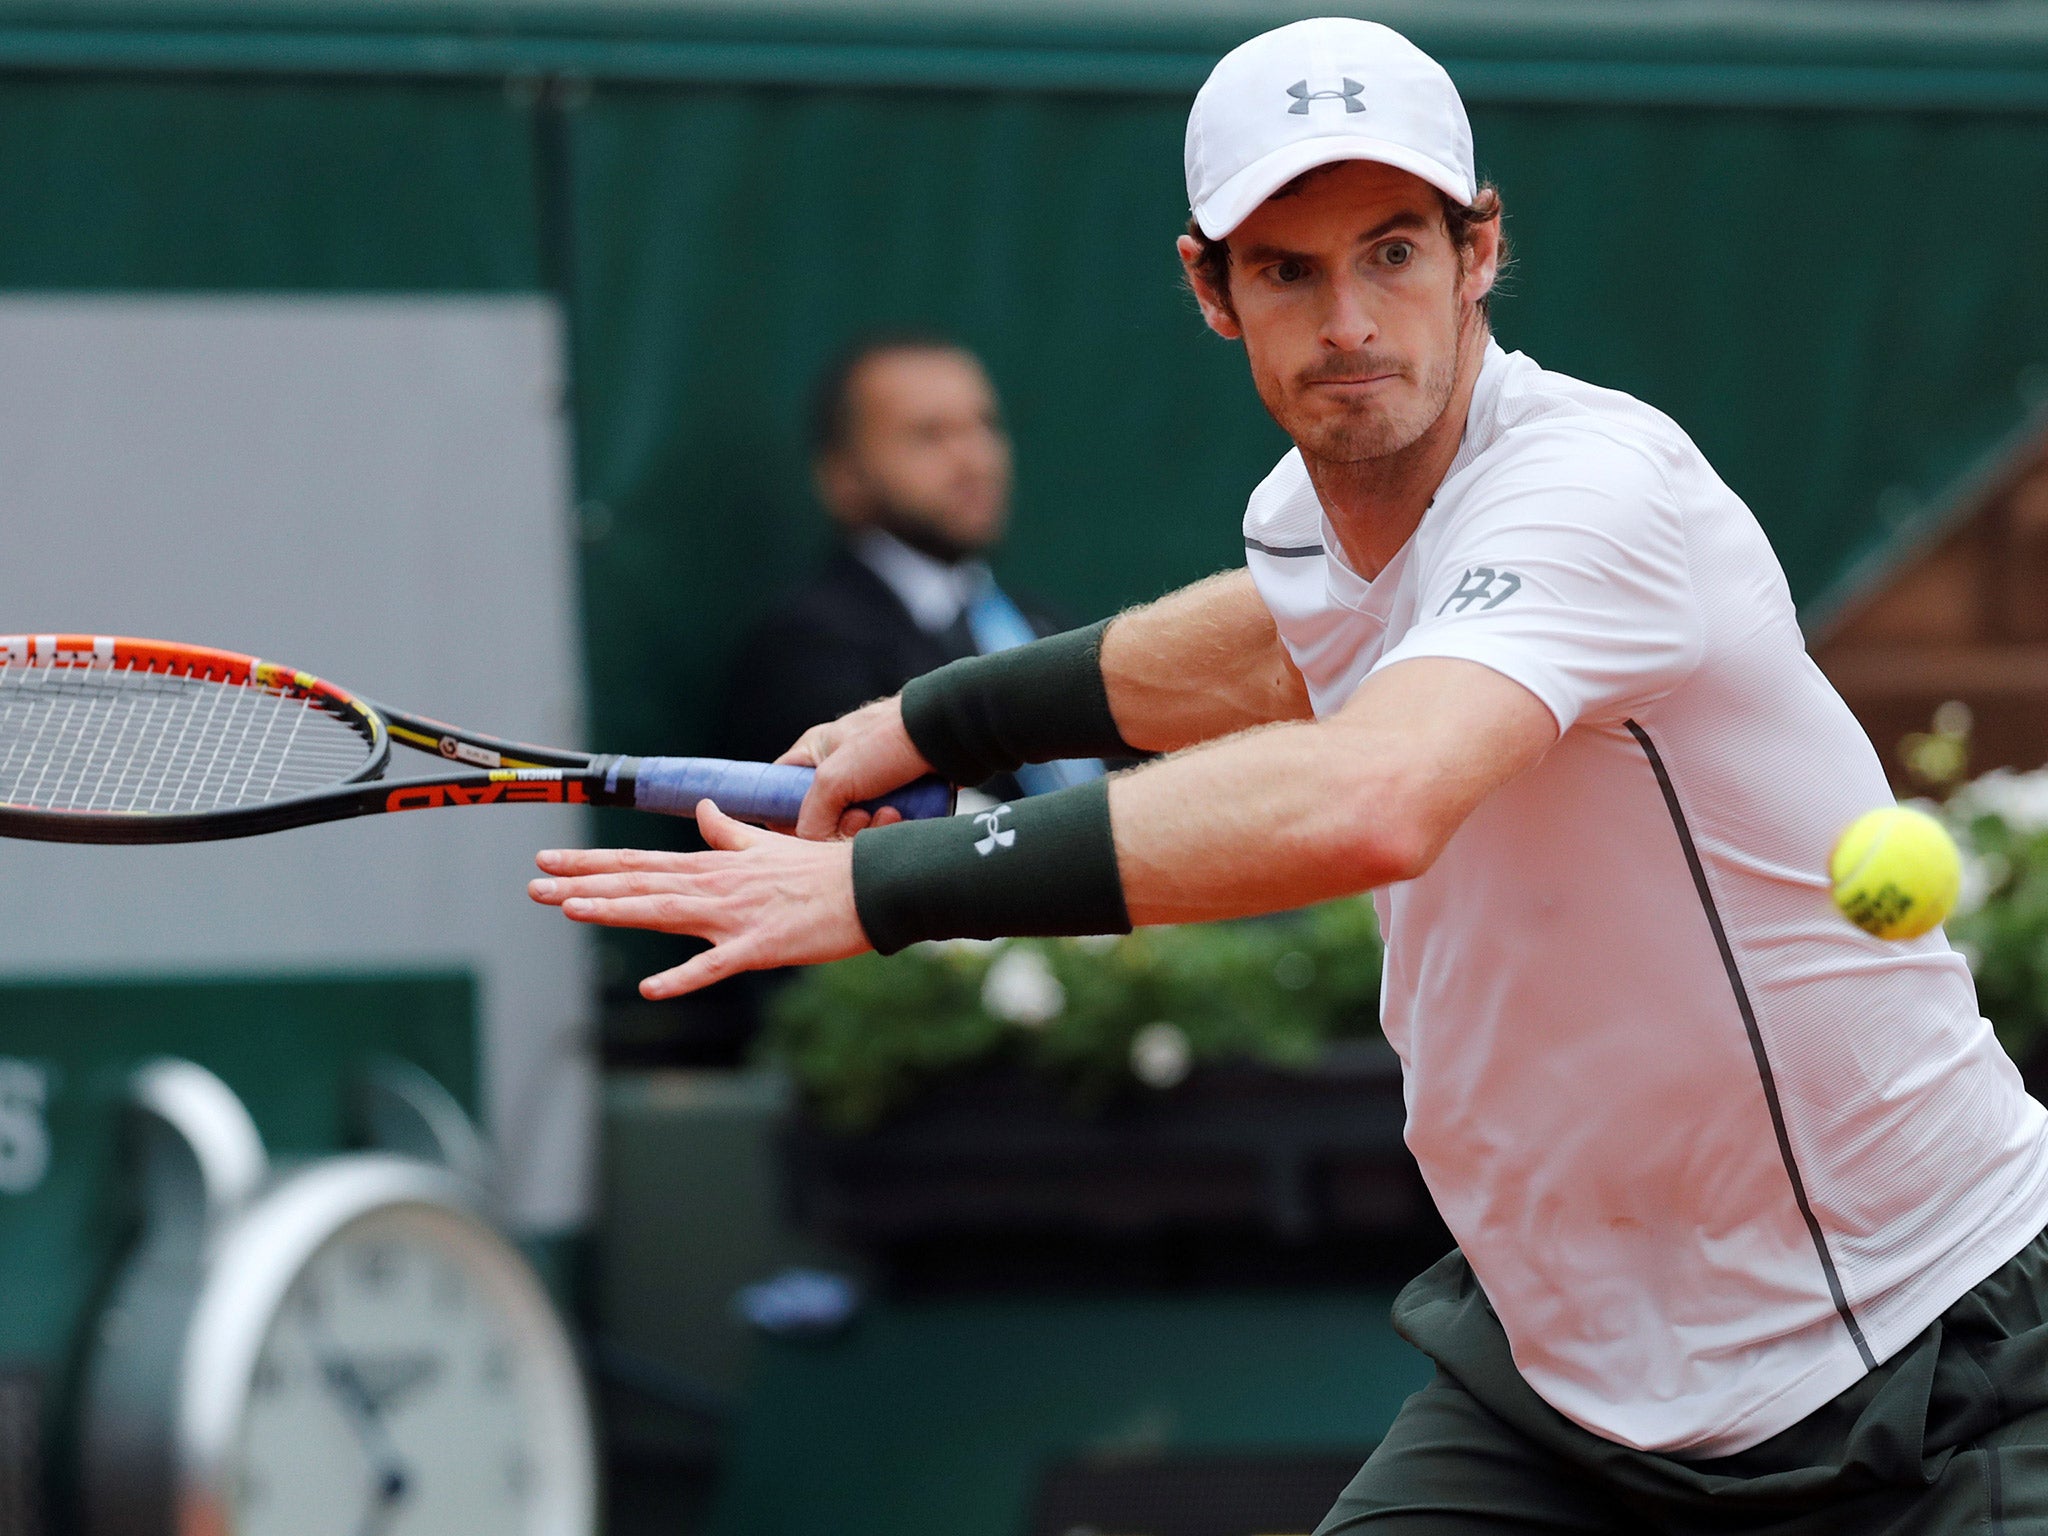 Andy Murray will face Ricard Gasquet in the quarter-finals